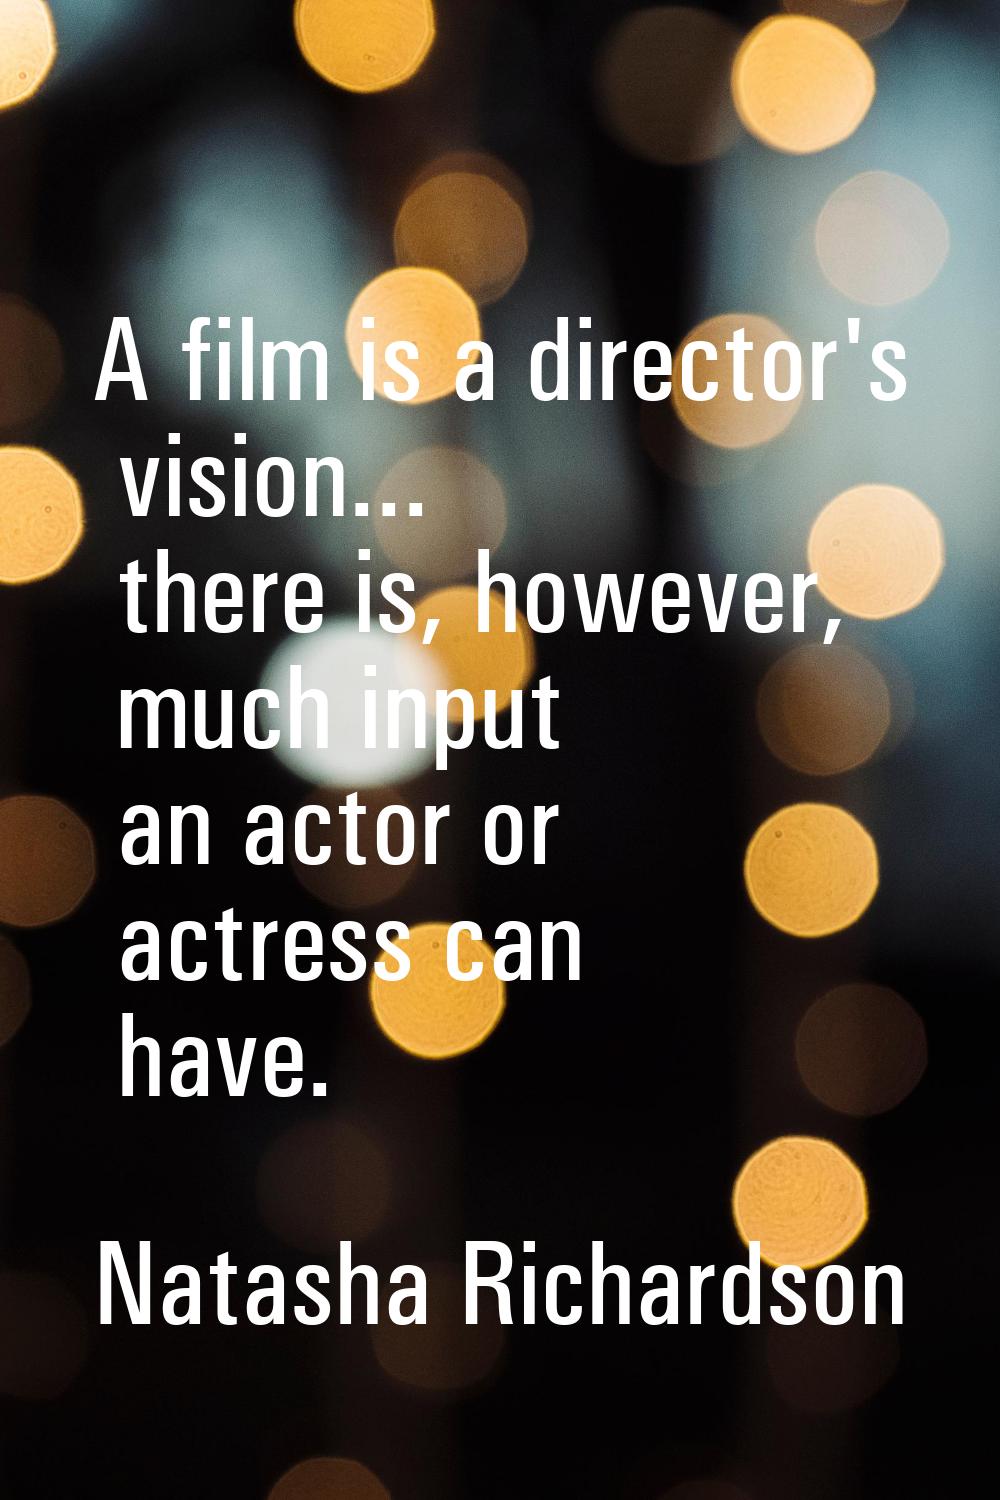 A film is a director's vision... there is, however, much input an actor or actress can have.